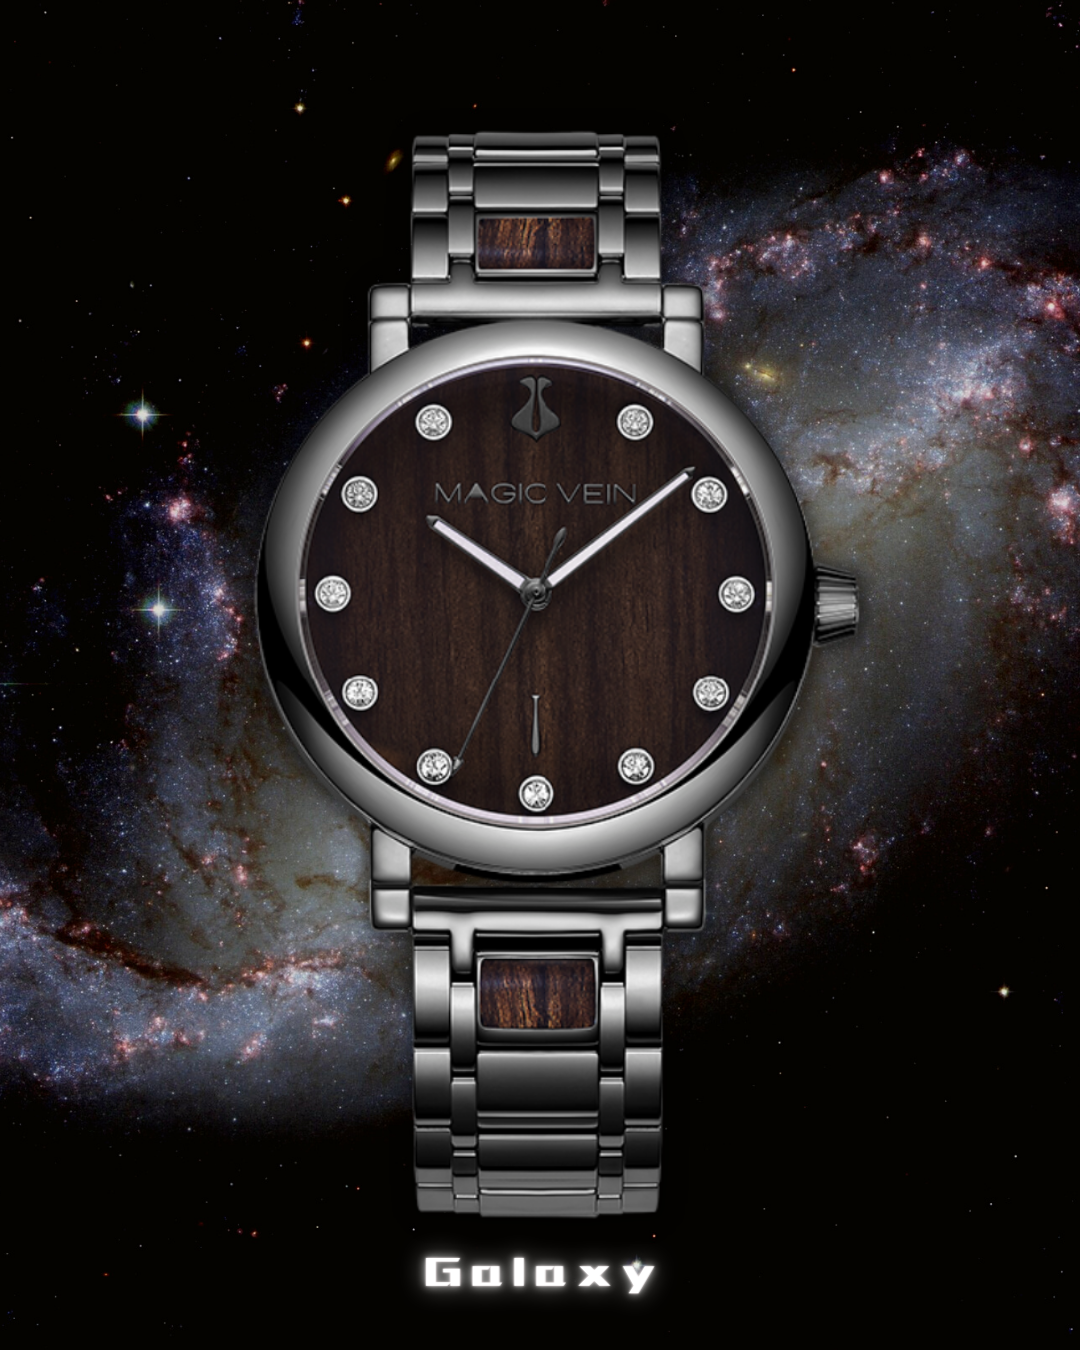 Discover watches you've never seen before. Magic vein offers the most unique and cool watches made by wood, jasper and opal. Shop for both men's watches and women's watches.